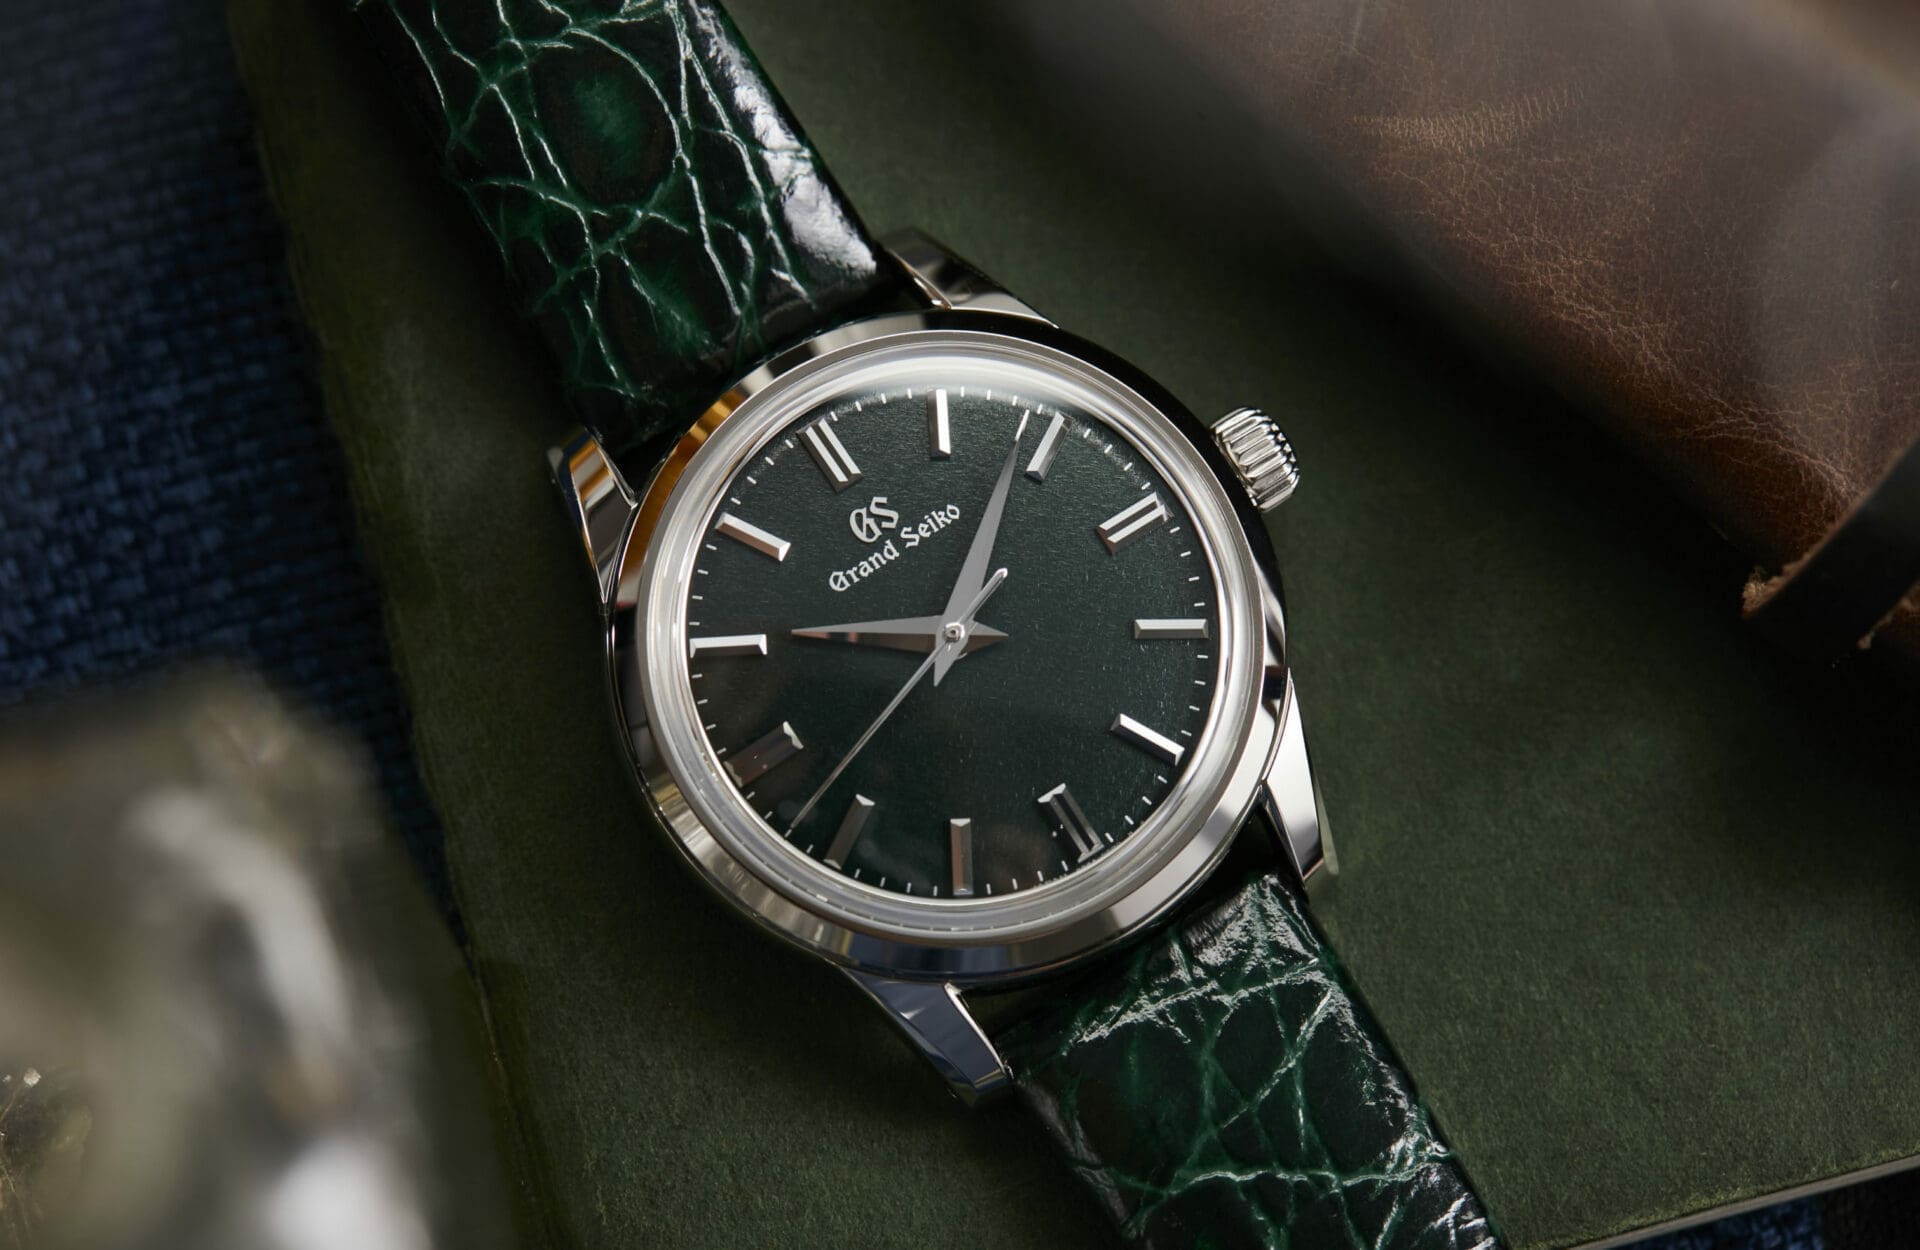 VIDEO: The new Grand Seiko SBGW283, SBGW285, and SBGE277